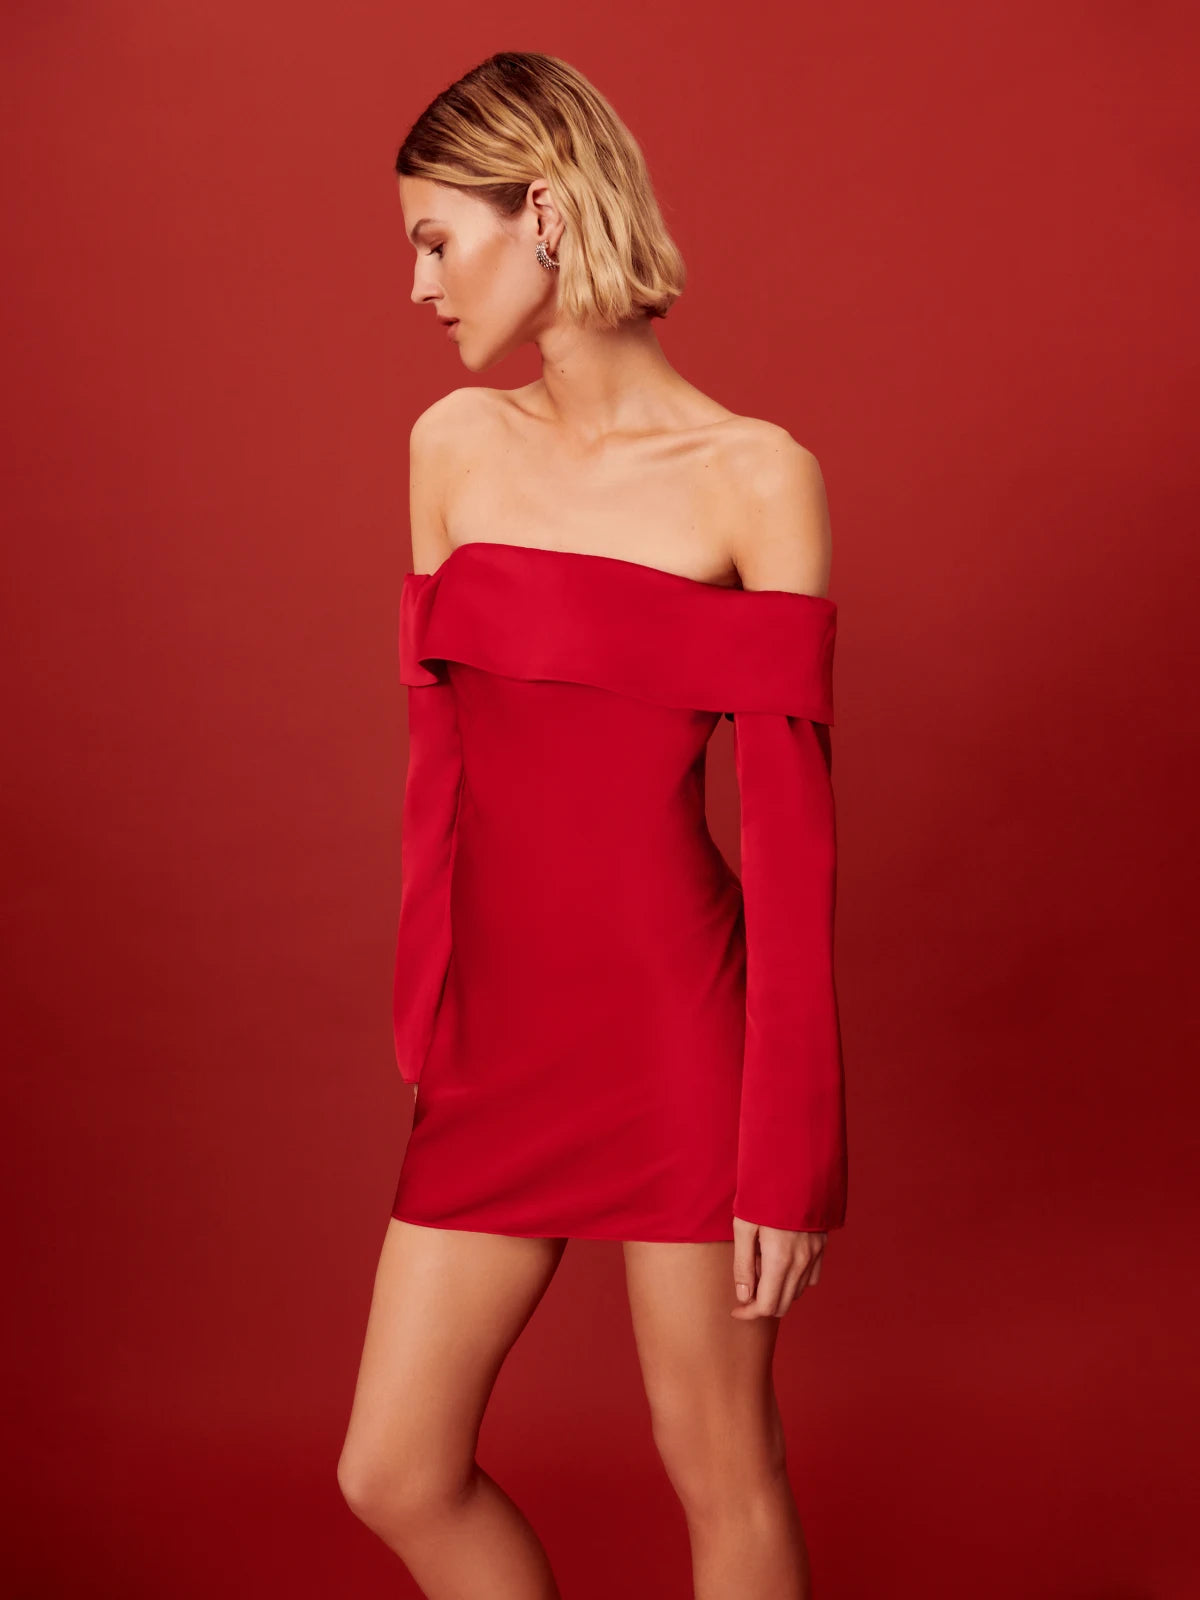 19 Dresses For Small Chests - Starting at $18 – topsfordays